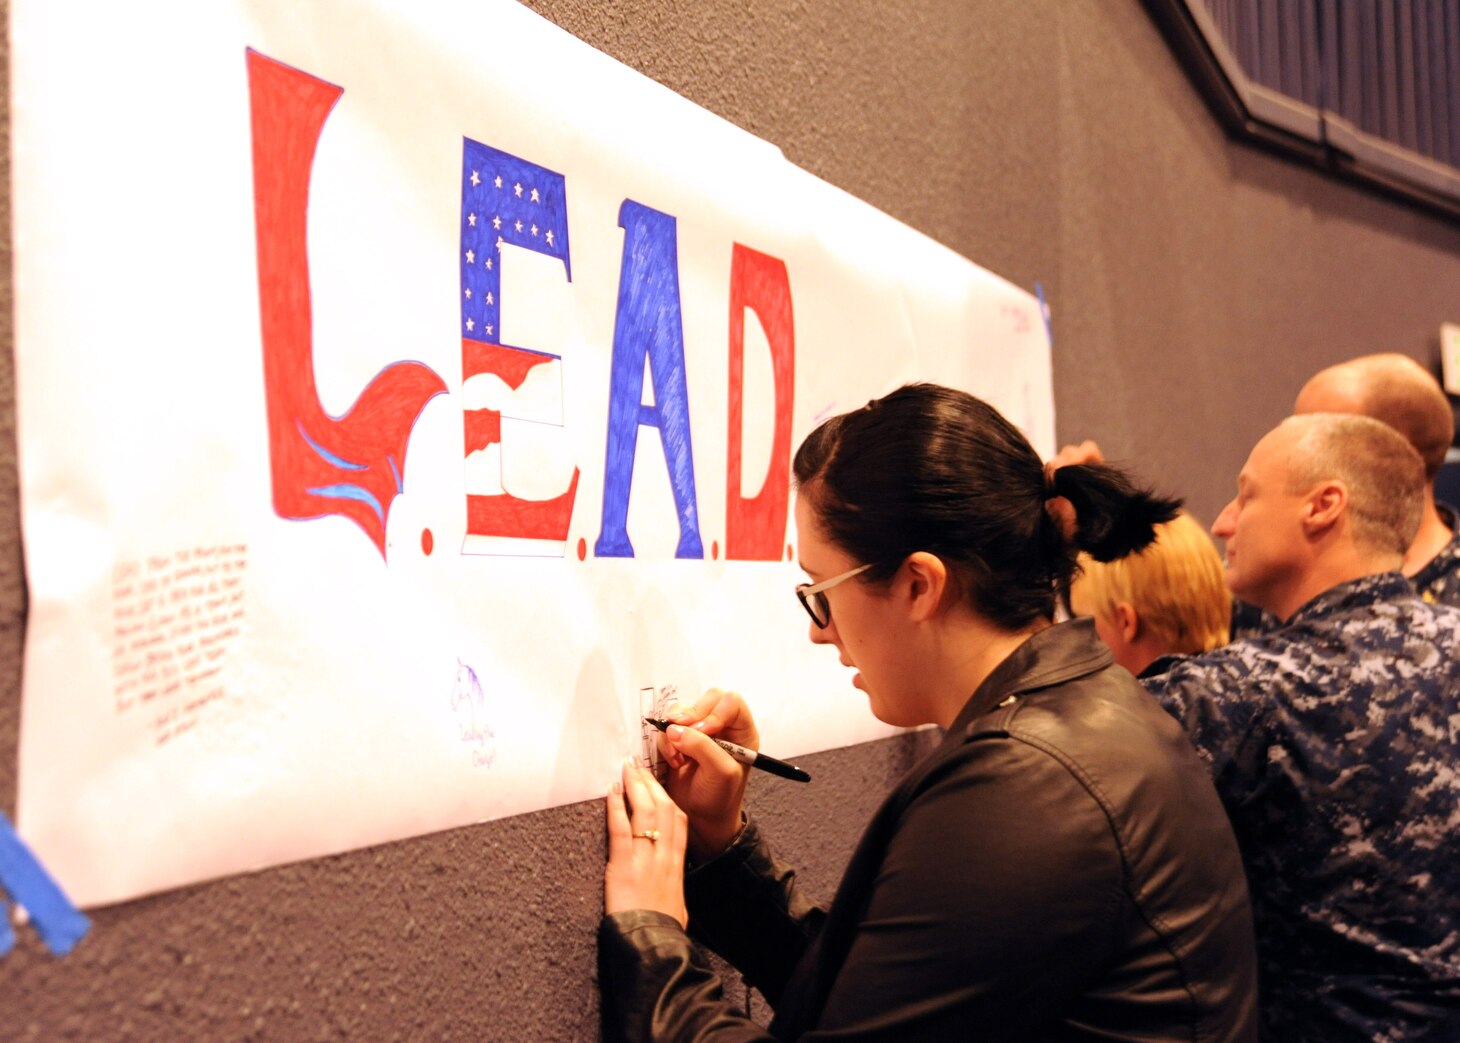 YOKOSUKA, Japan (July 21, 2016)  Cryptologic Technician (Maintenance) 3rd Class Noelle Johnson, assigned to Navy Information Operations Command Yokosuka, draws a picture of what leadership means to her on a poster at 7th Fleet's first Leadership, Equality, and Diversity (LEAD) symposium on Yokosuka Naval Base. The LEAD symposium focused on cultivating leadership and understanding of equality and diversity issues in the Navy. (U.S. Navy photo by Mass Communication Specialist 2nd Class Indra Bosko/Released)